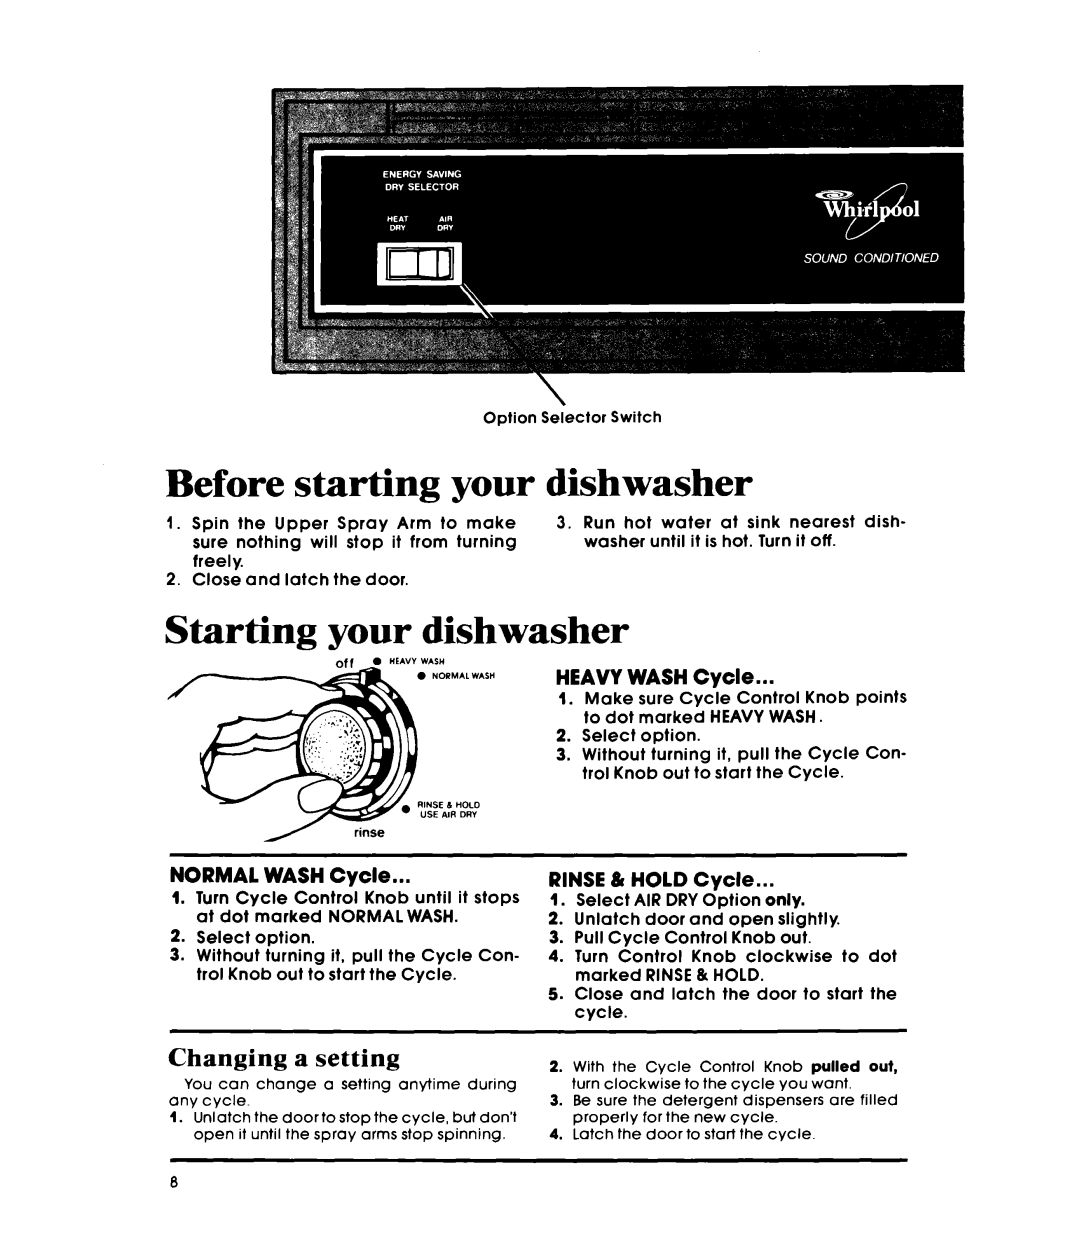 Whirlpool GDU3024XL manual Before starting your dishwasher, Starting your dishwasher, Changing a setting, HEAVY WASH Cycle 